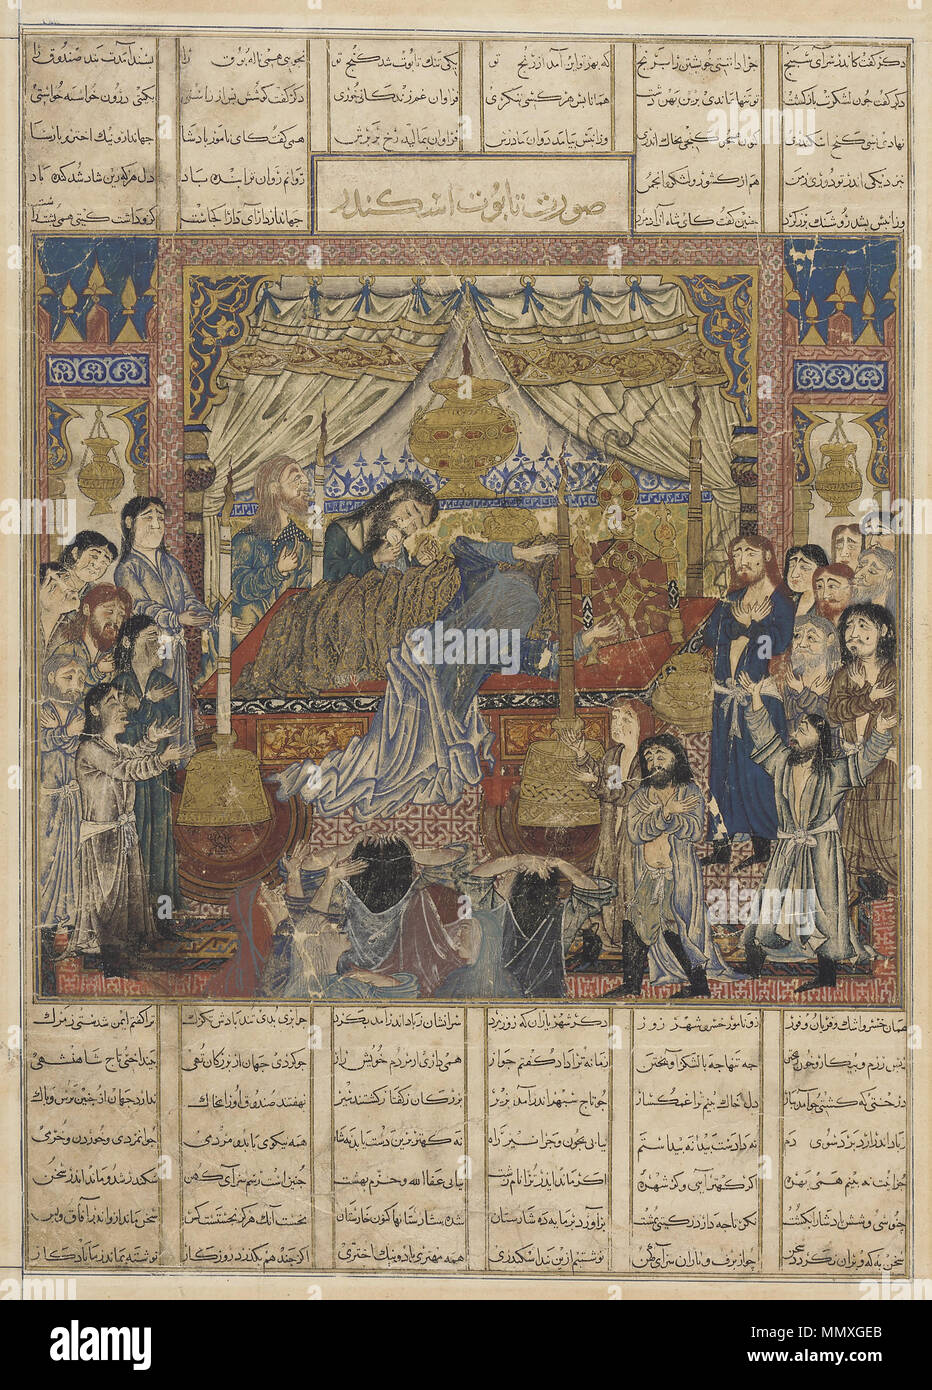 Folio from a Shahnama (Book of Kings) by Firdawsi (d.1020) : ' ???? ????? ?????? ??rat-i t?b?t Iskandar (Picture of Alexander the Great's coffin)'. circa 1330. Firdawsi - Folio from a Shahnama (Book of Kings) - Google Art Project Stock Photo